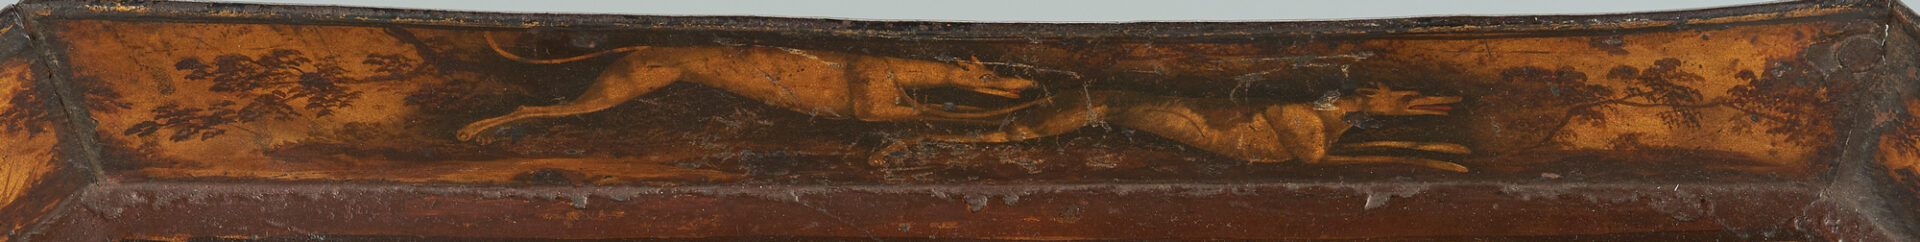 Lot 117: Large English Equestrian Themed Toleware Tray, Early Regency